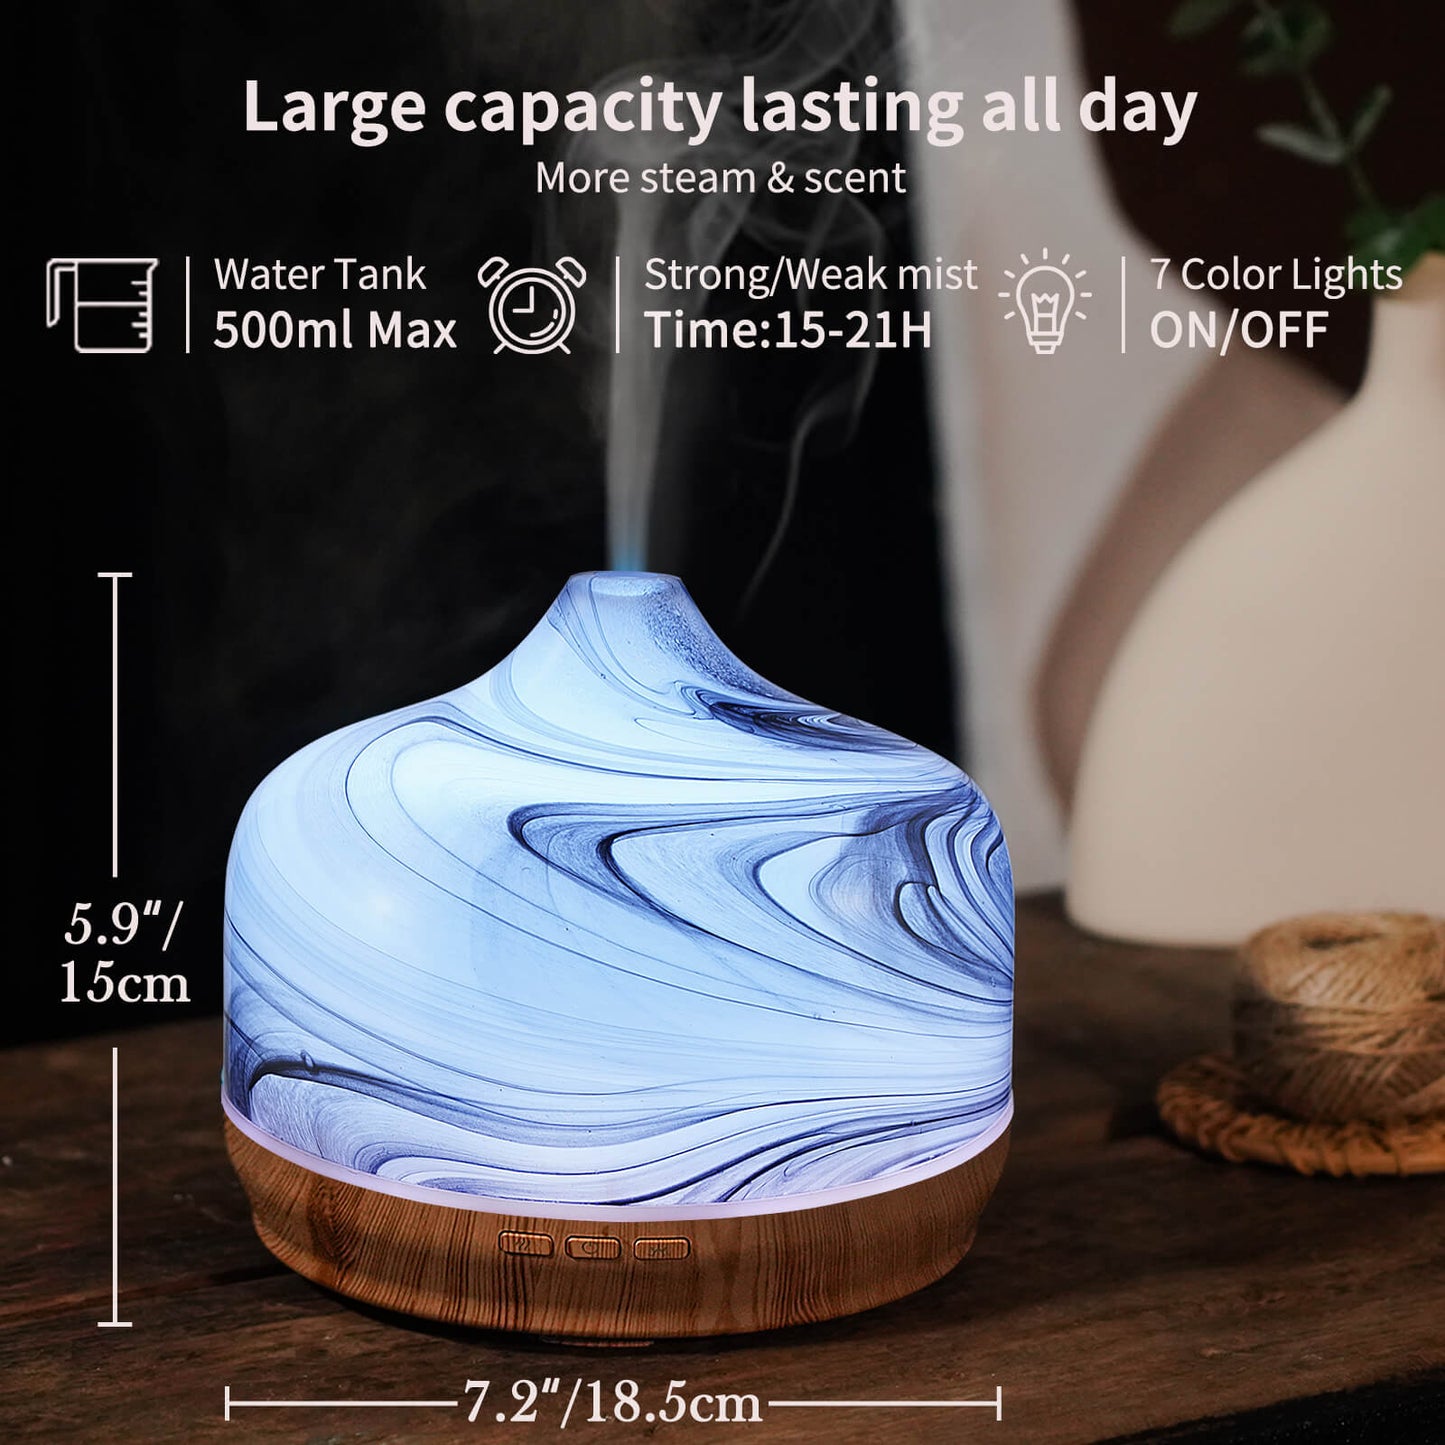 Porseme 500ml Glass Essential Oil Diffuser Aromatherapy Ultrasonic Cool Mist Humidifier 15-21 Running Hours Waterless Auto-Off Air Diffusers for Sleeping,Yoga,Office Working,Spa and Rest (Ink)